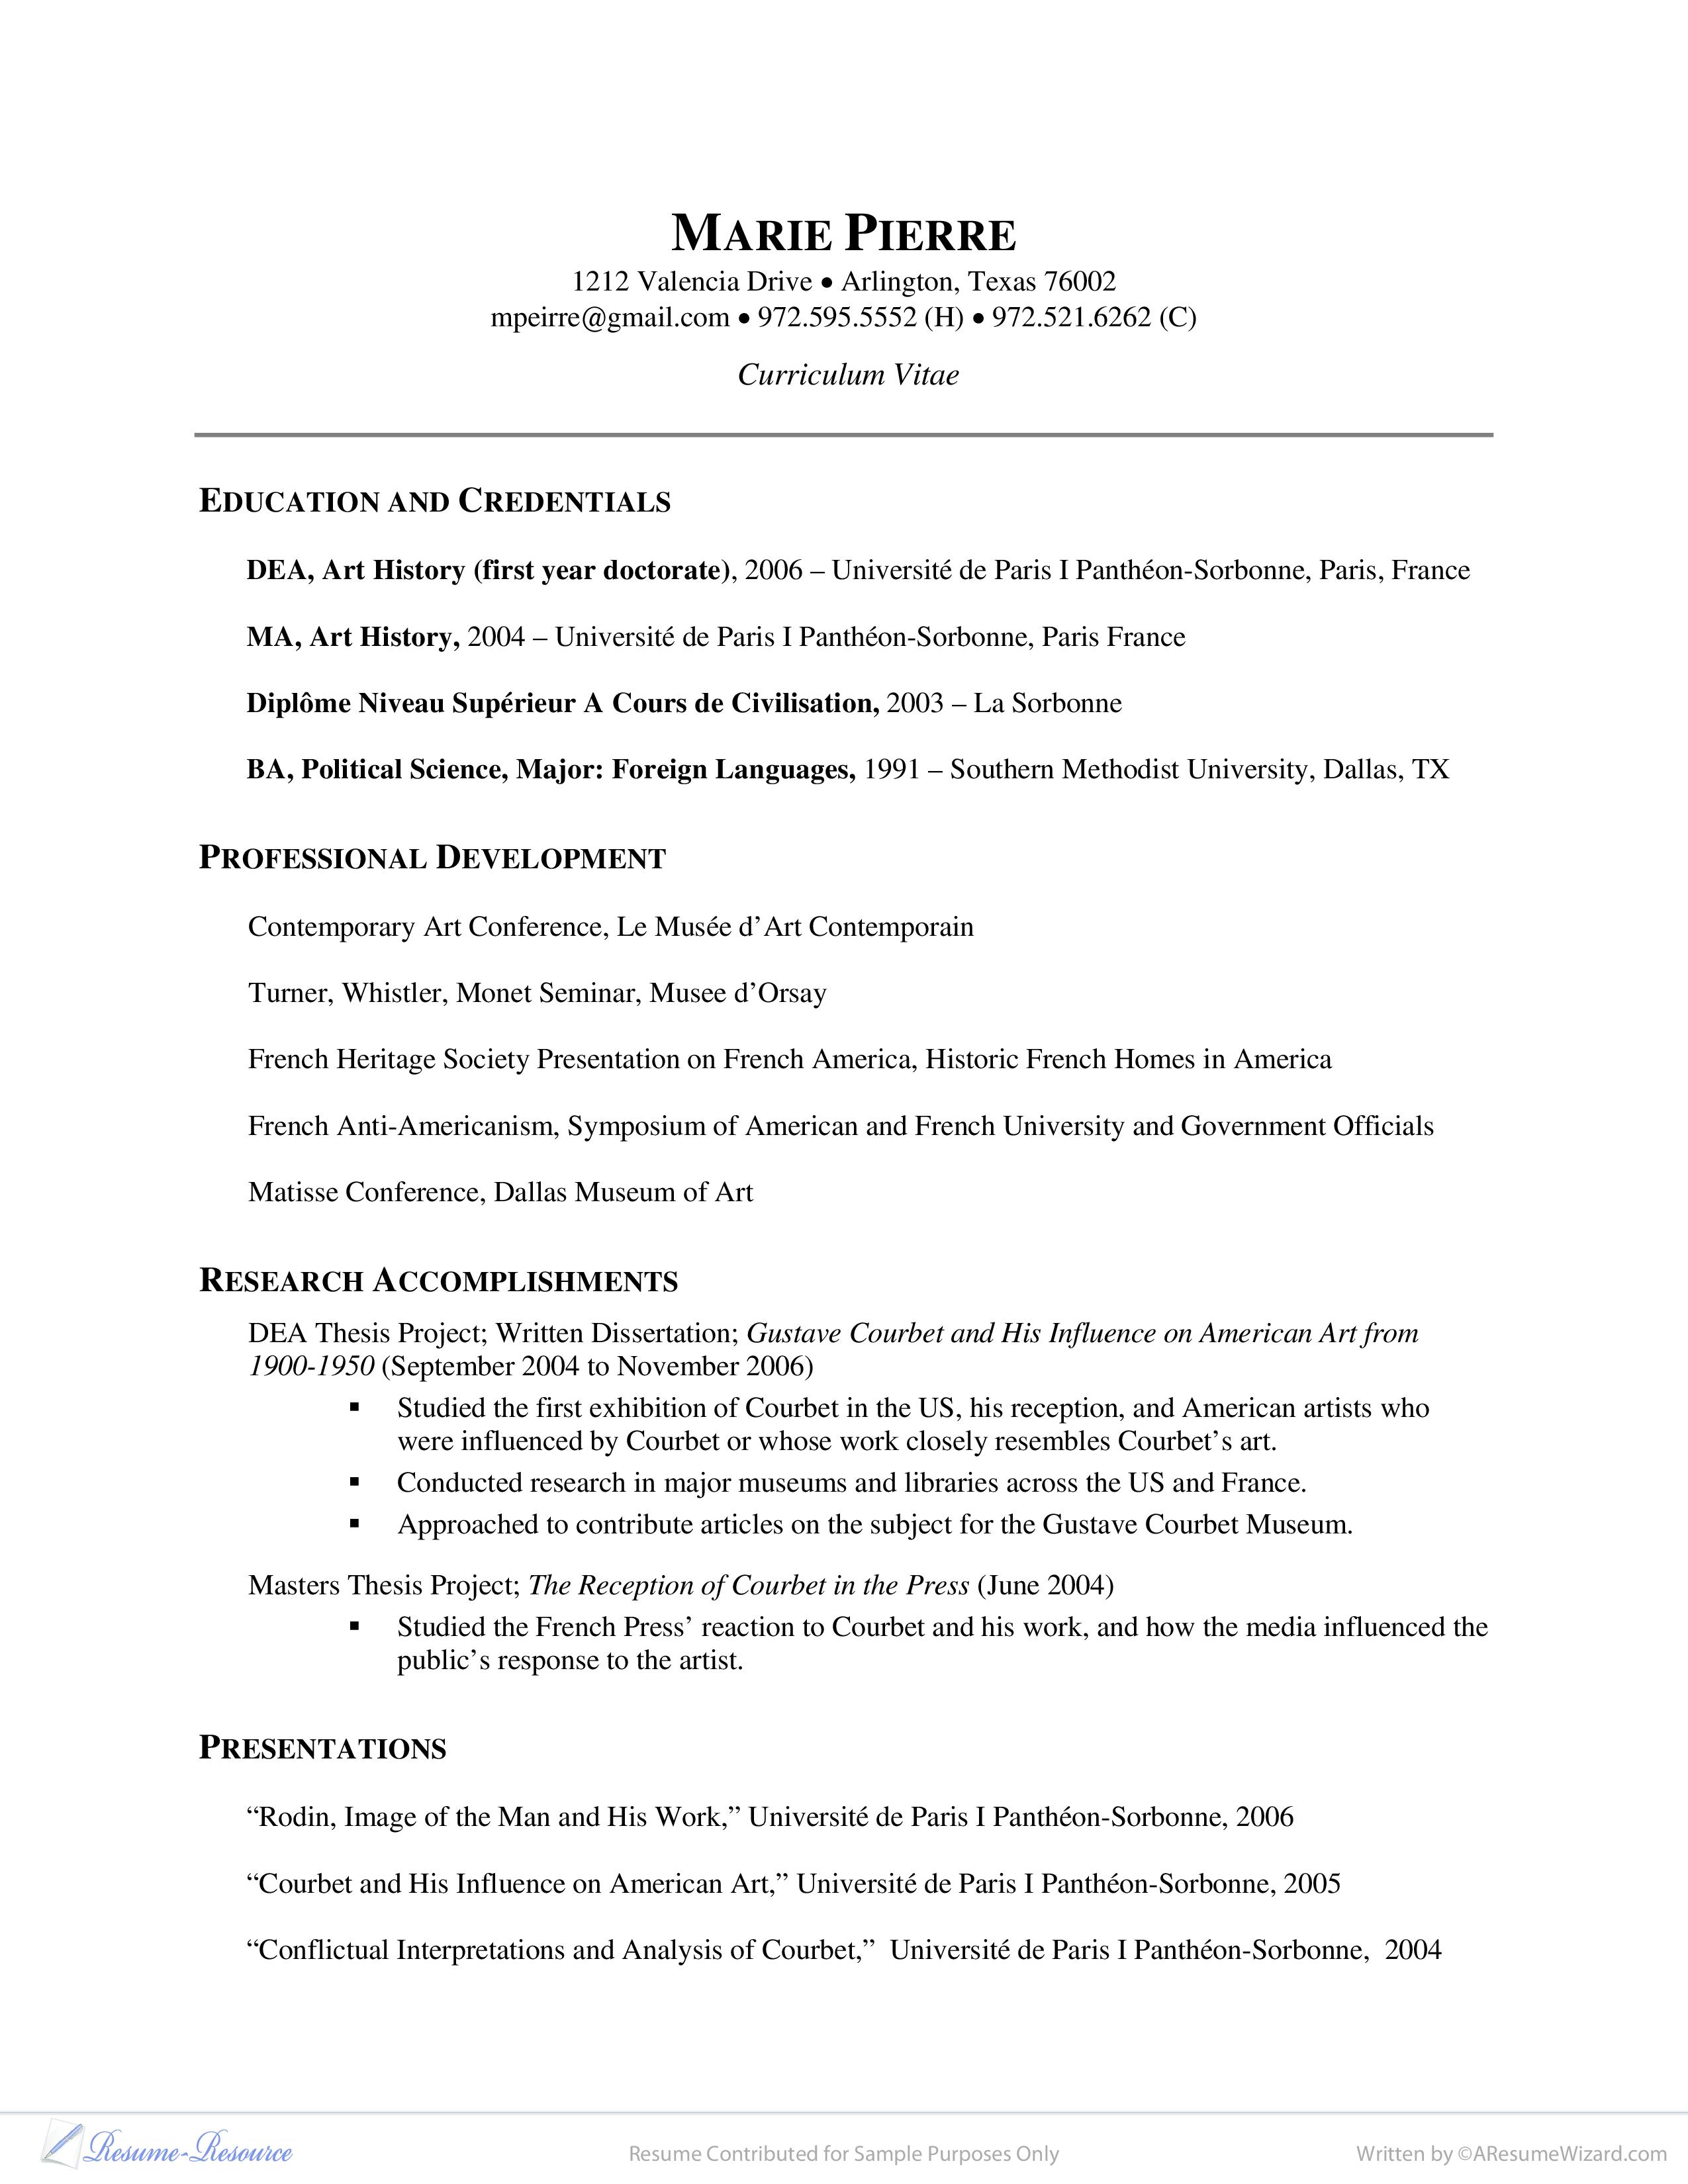 Free Curriculum Vitae Example Researcher Art History Templates At